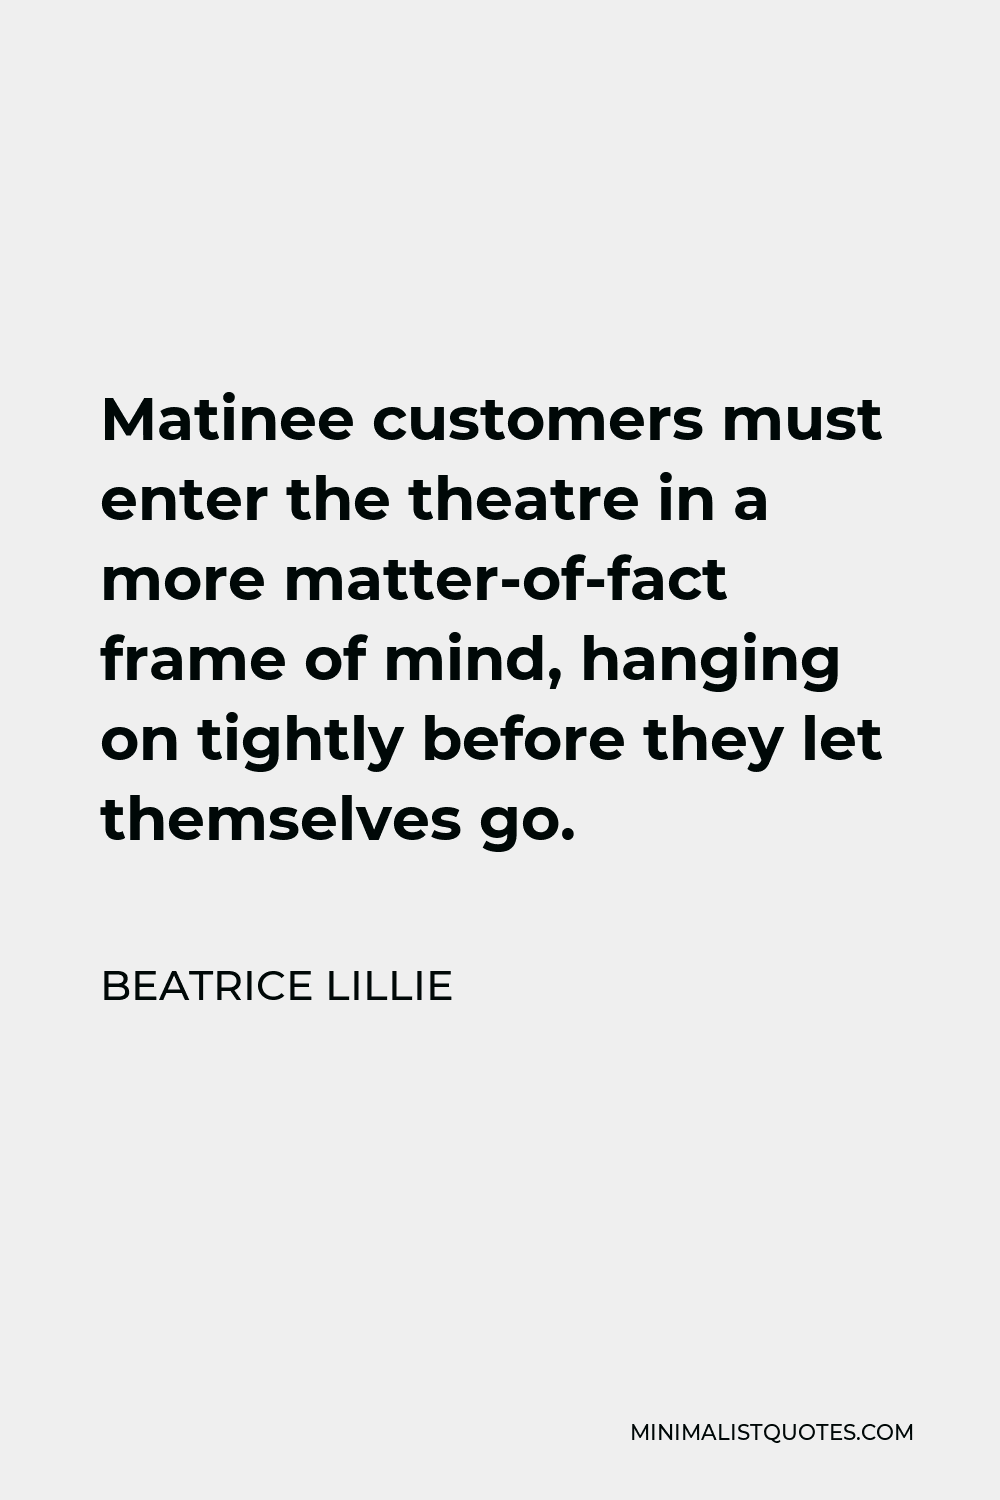 Beatrice Lillie Quote - Matinee customers must enter the theatre in a more matter-of-fact frame of mind, hanging on tightly before they let themselves go.